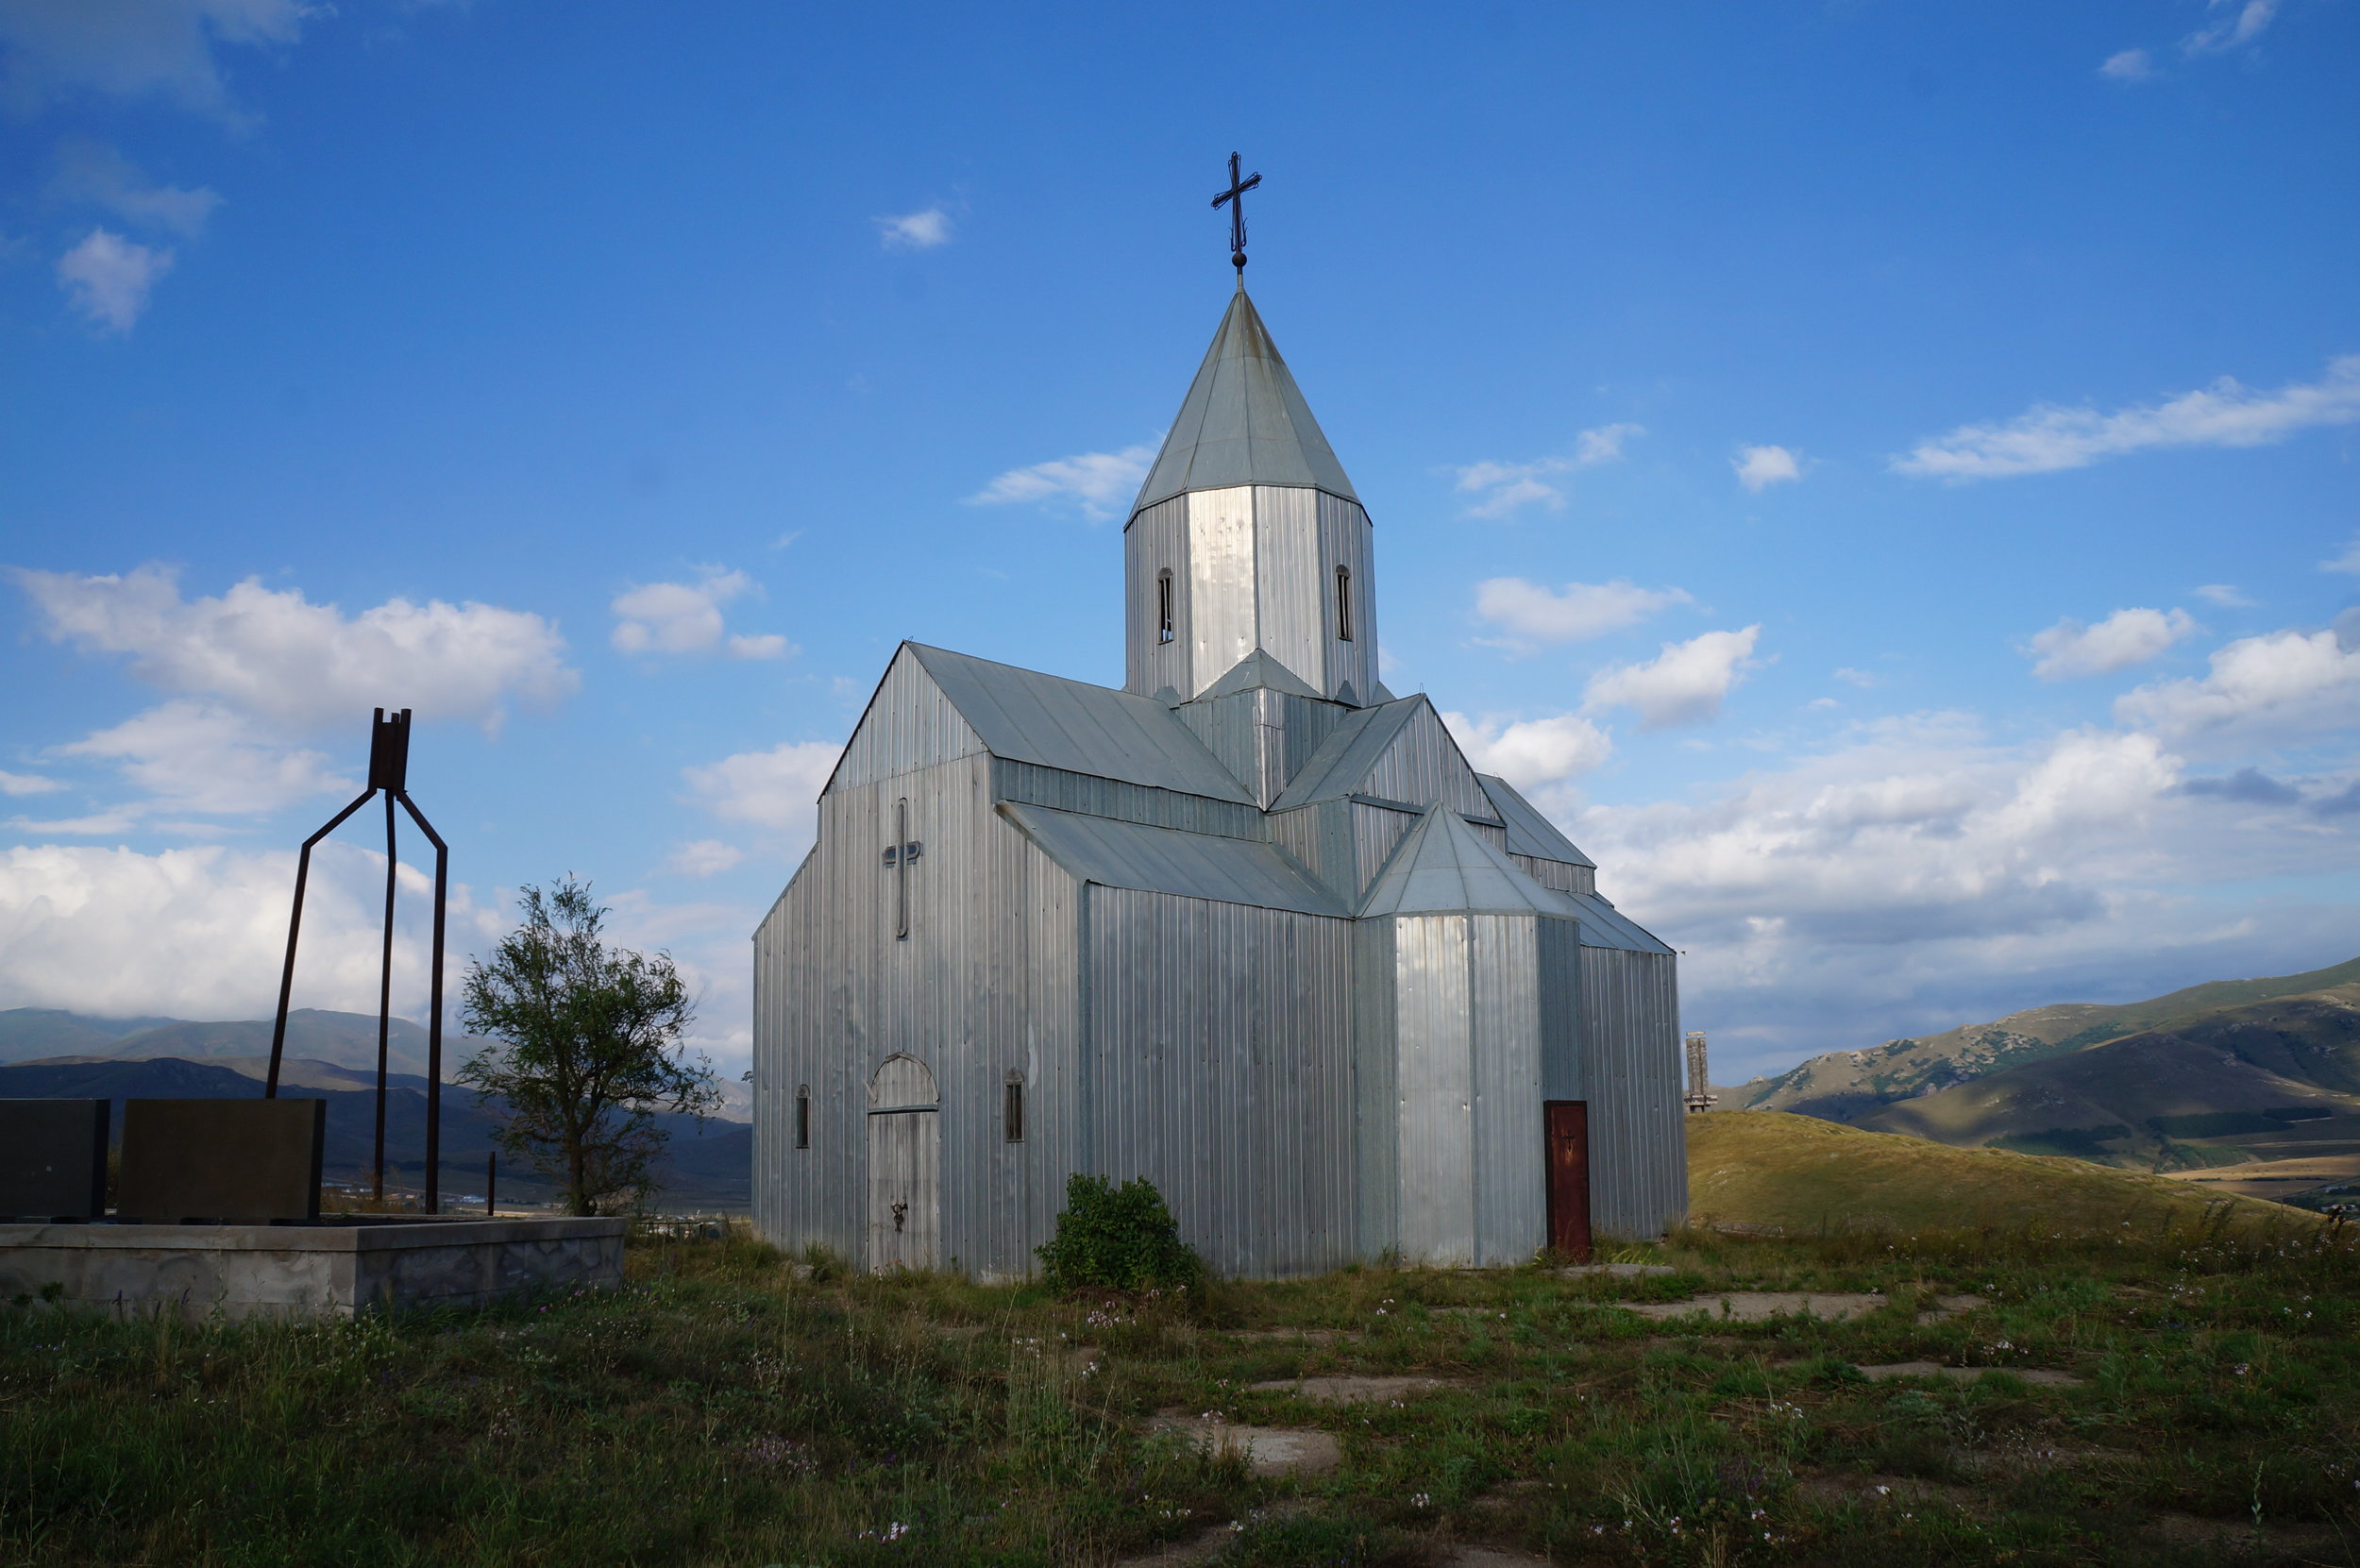 This church was built quickly after the tragedy to be a symbol of comfort and renewal. Constructed entirely of sheet metal, instead of traditional Armenian stone, it stands unique.